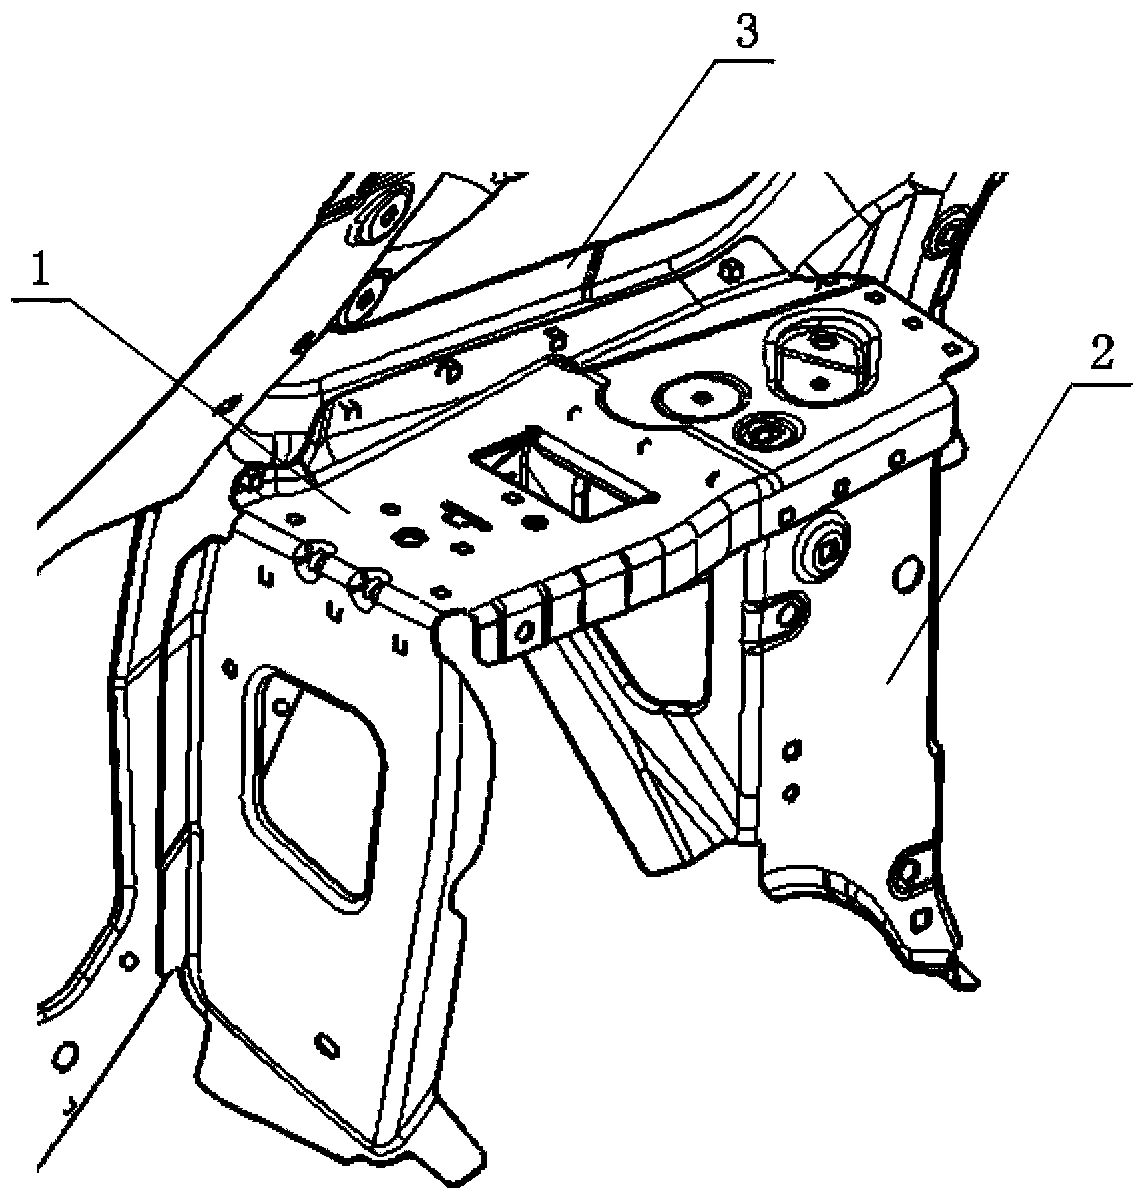 Retraction device for automobile rear seat safety belt